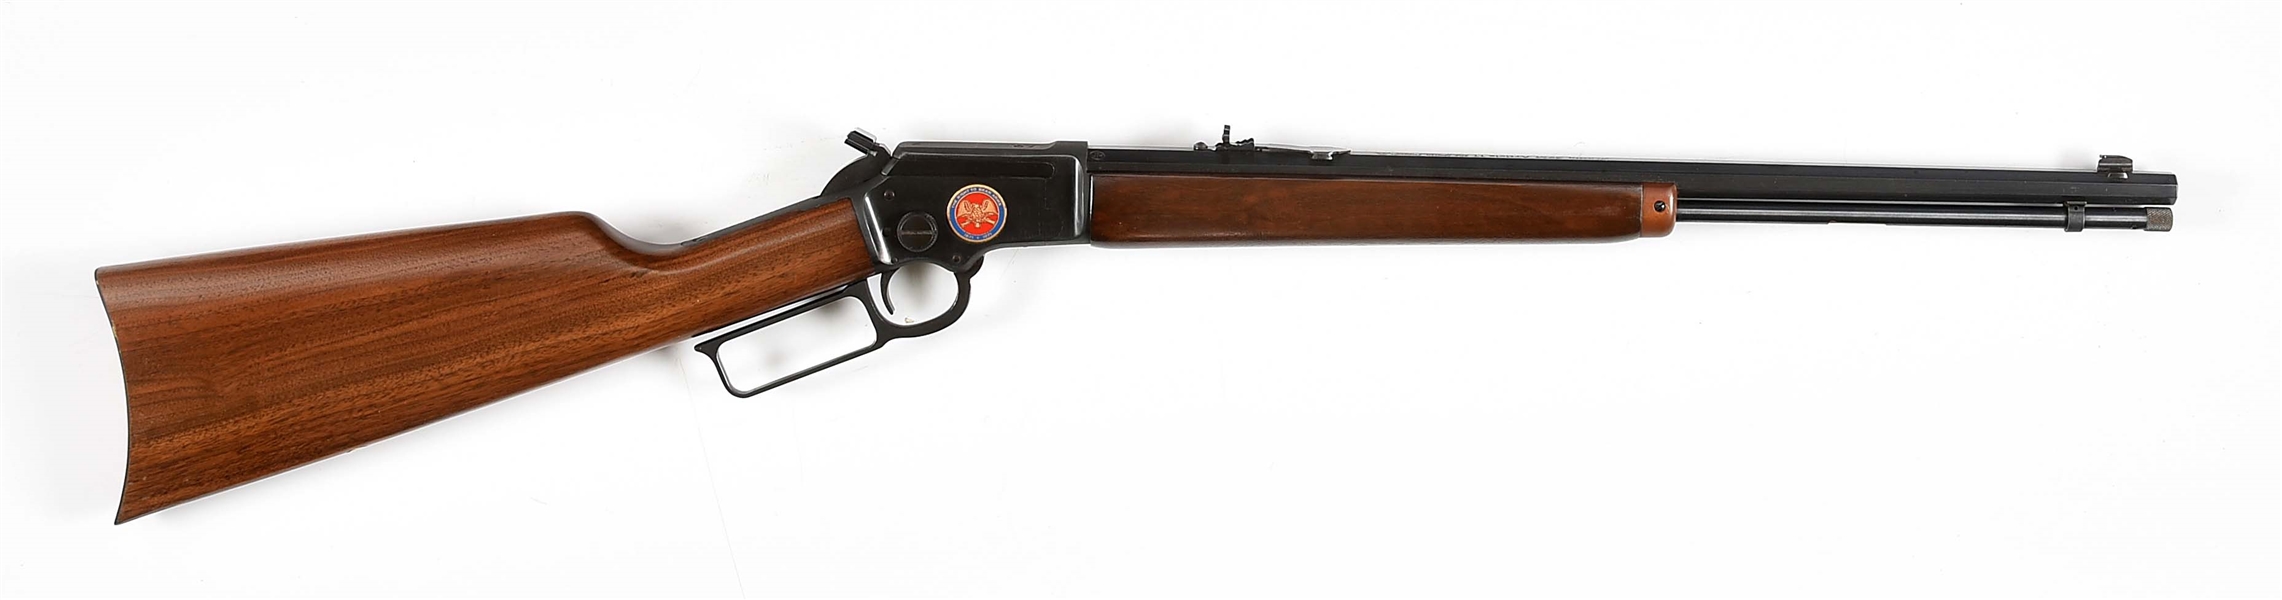 (M) MARLIN MODEL 39M ARTICLE II LEVER ACTION RIFLE